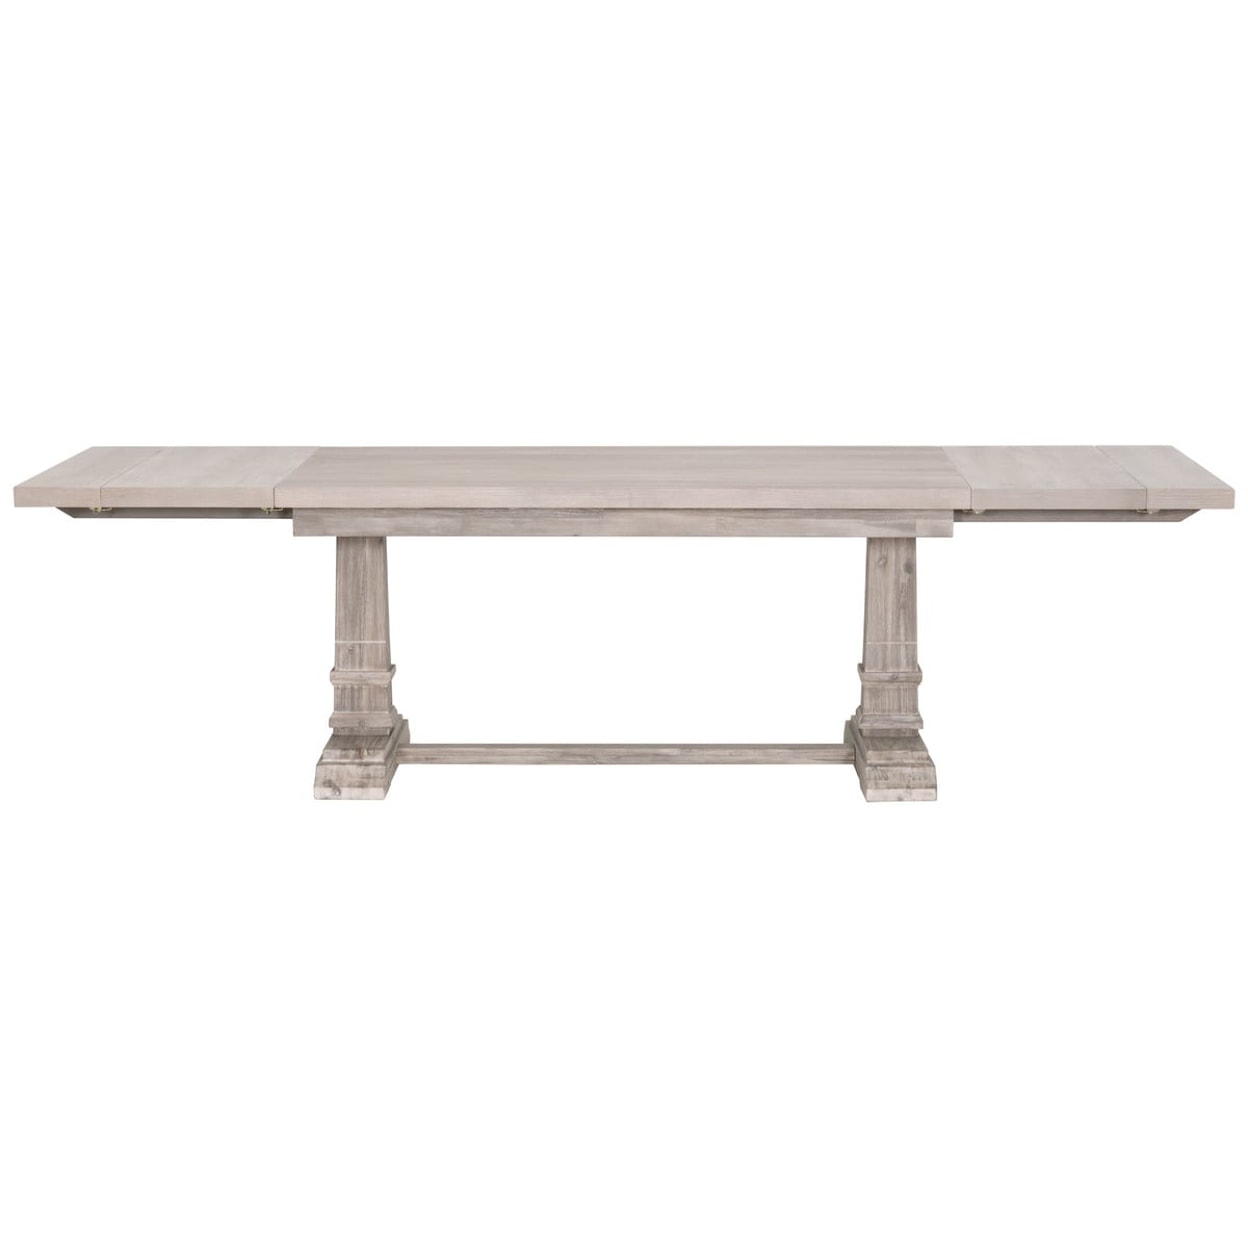 Essentials for Living Traditions Hudson Extension Dining Table